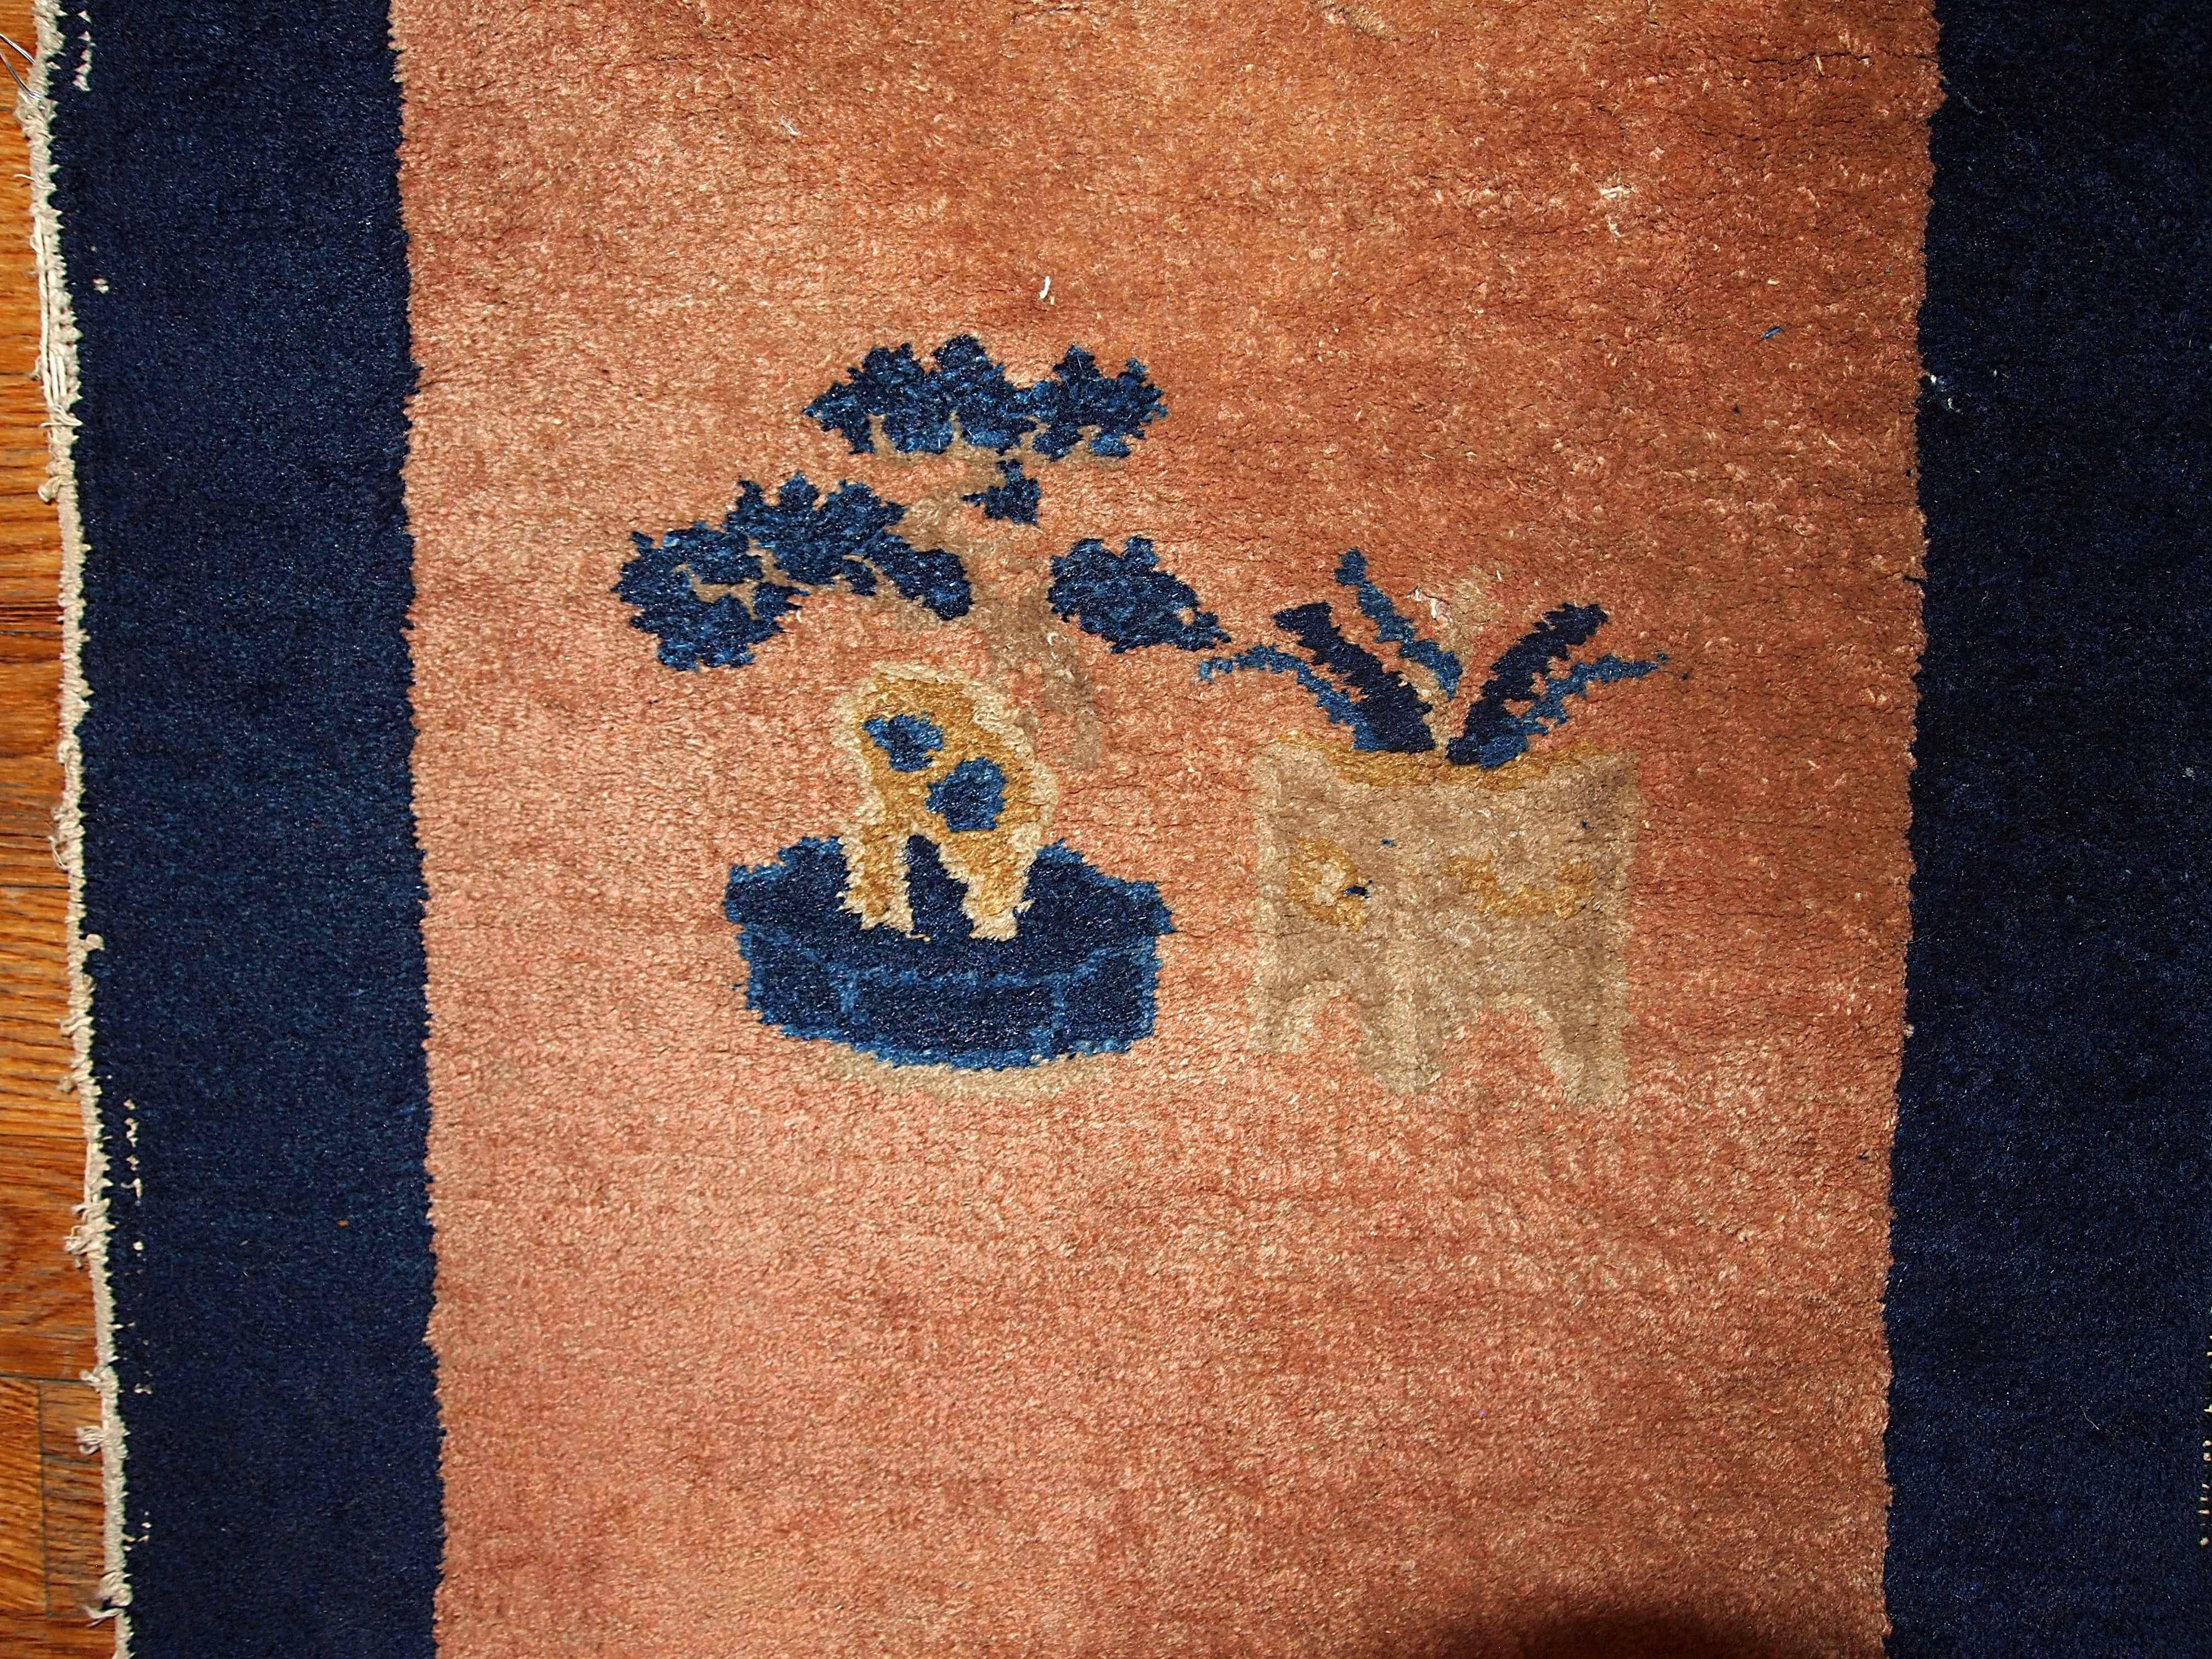 Crafted in beginning of 20th century this Peking Chinese rug represents the fashion of minimalism which was popular on that time. Nice peach colored field and navy blue border with an image of tree in the center.